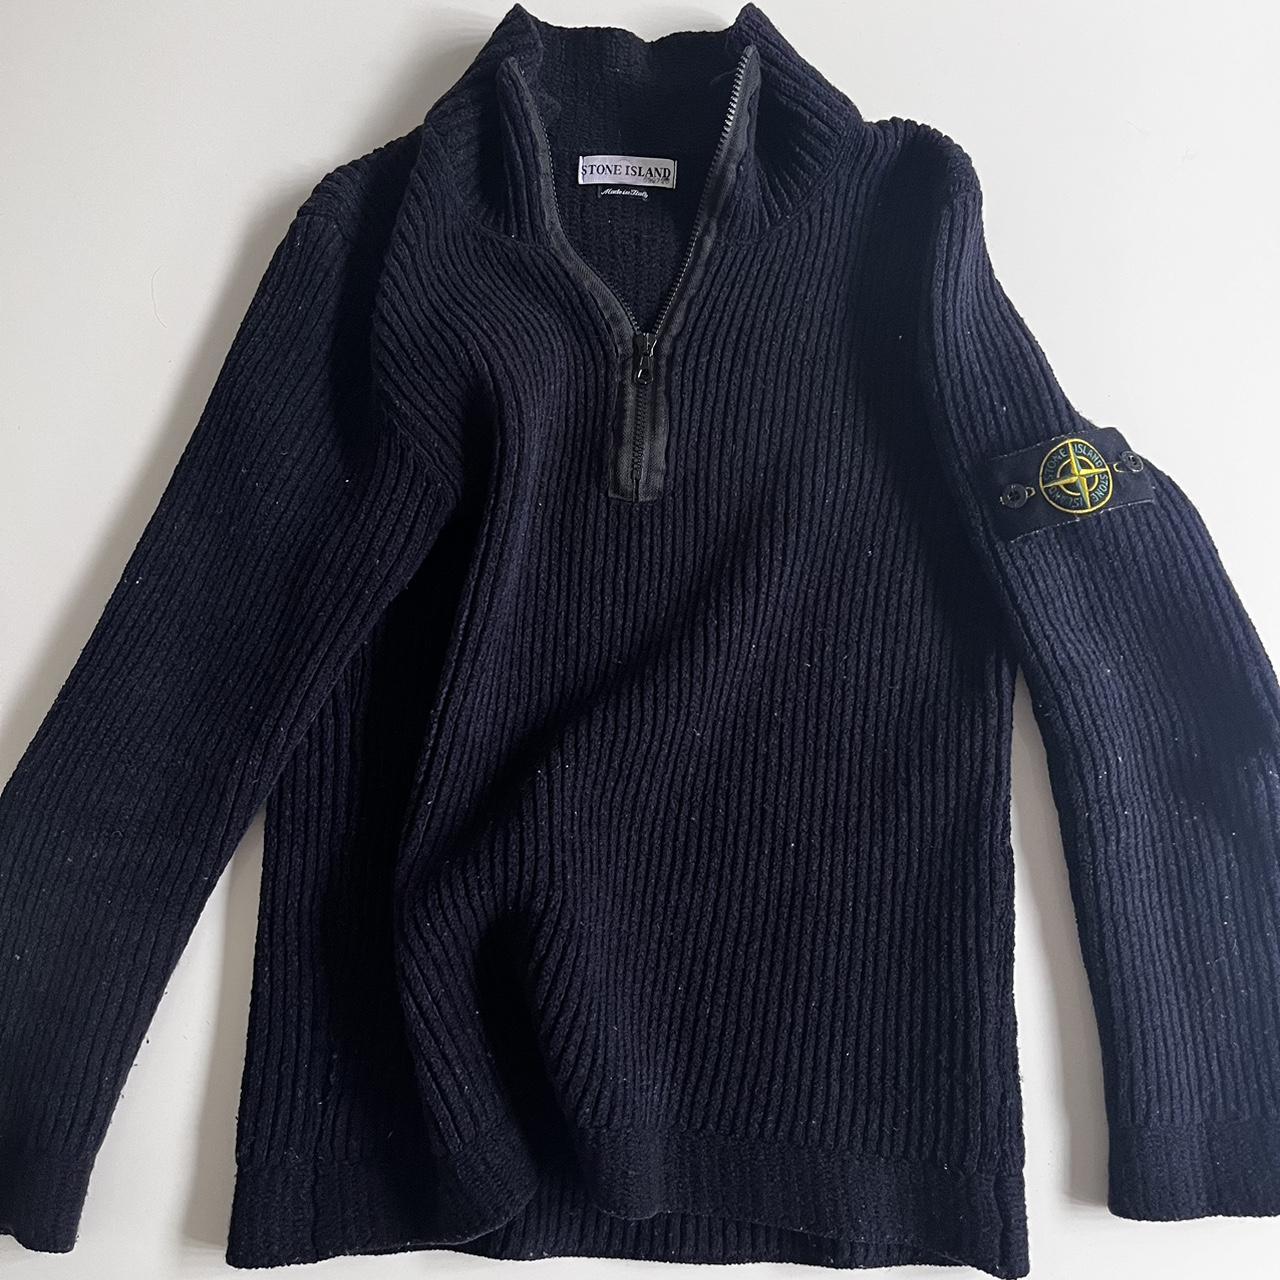 stone island navy cable knit zip up message for more... - Depop